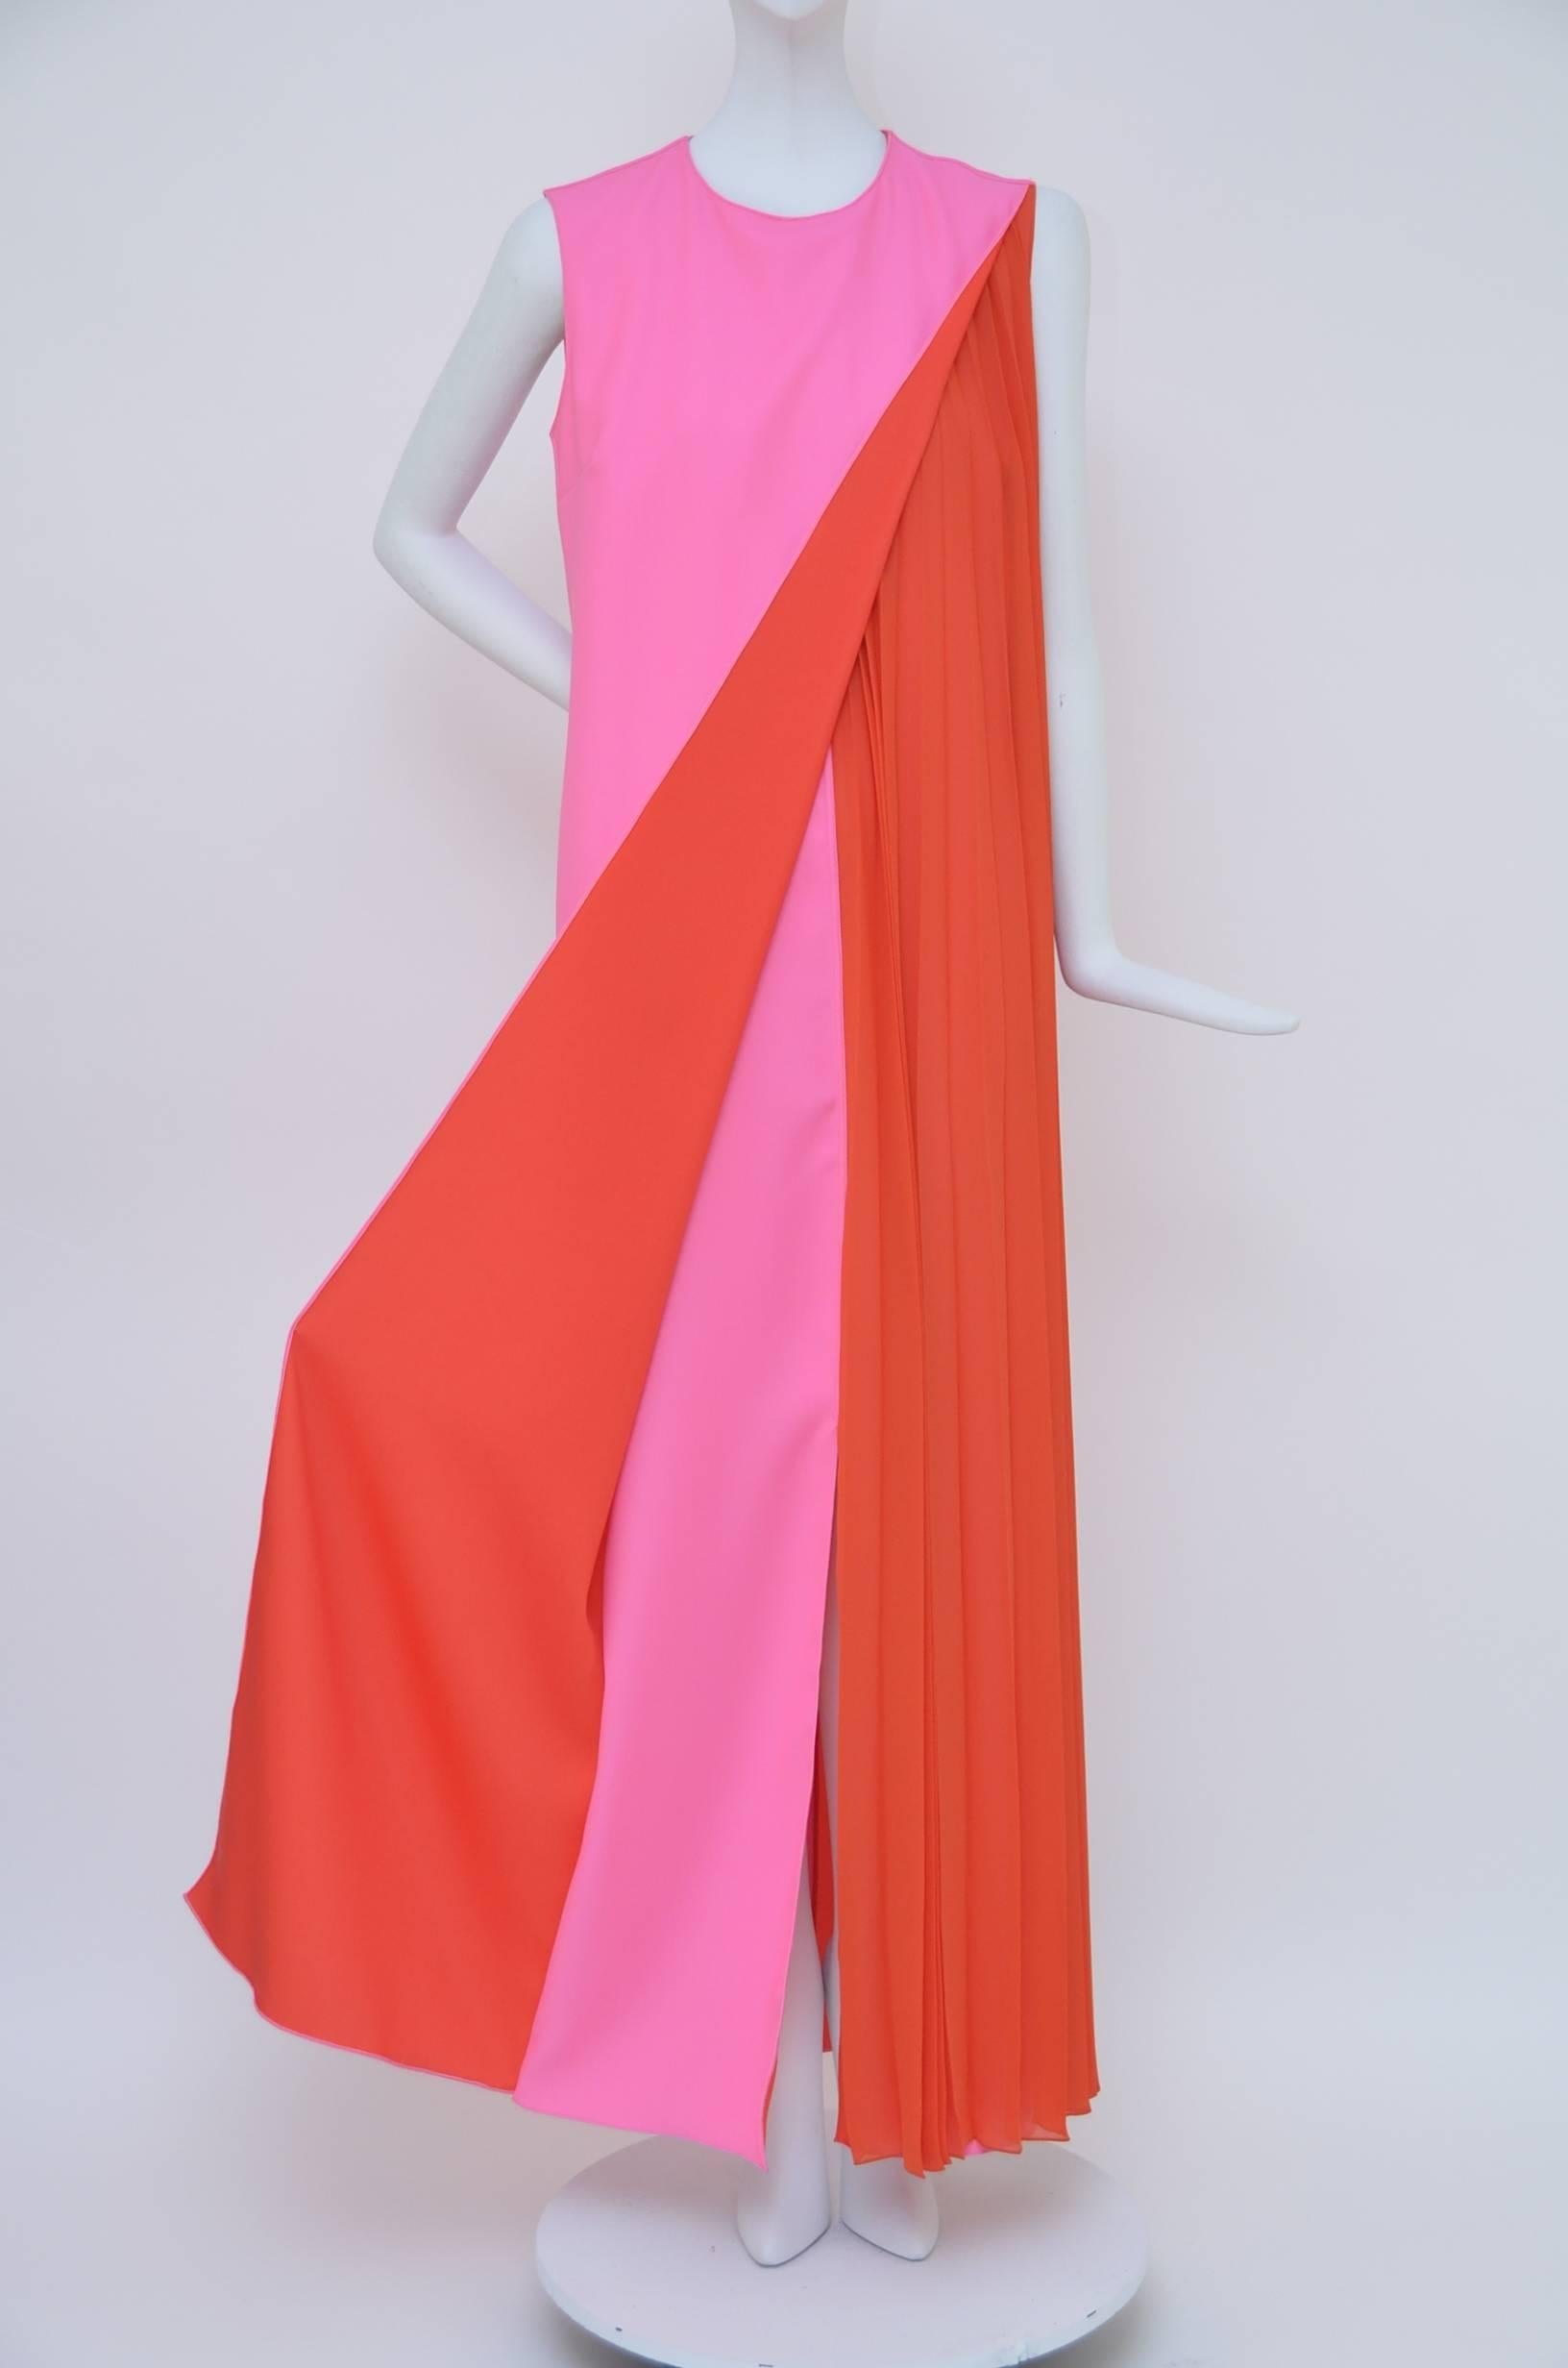 Christian Dior neon/pink dress.
Sleeveless with red pleated insert.
Excellent mint condition.
Size 4US.

FINAL SALE.